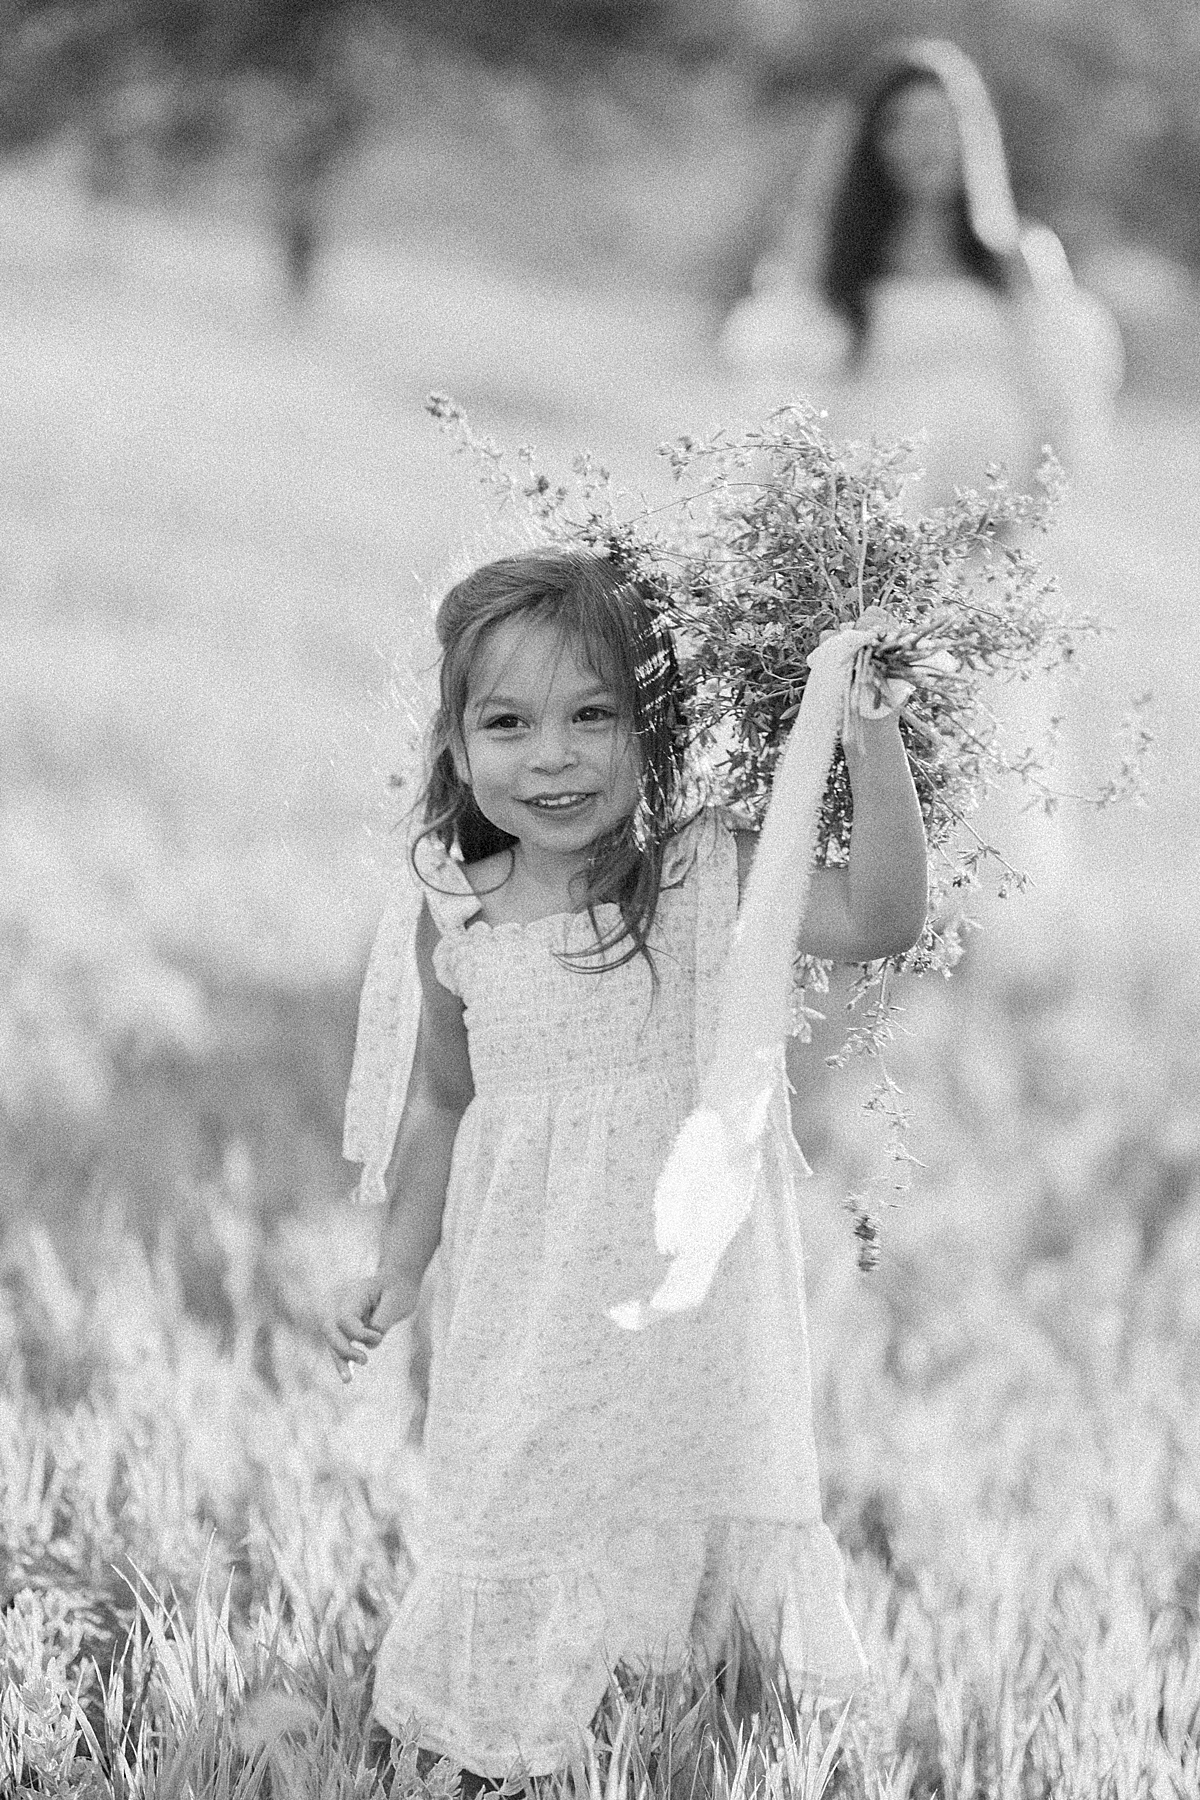 A cute 3 year old girl runs towards the camera with a bouquet in her hands.